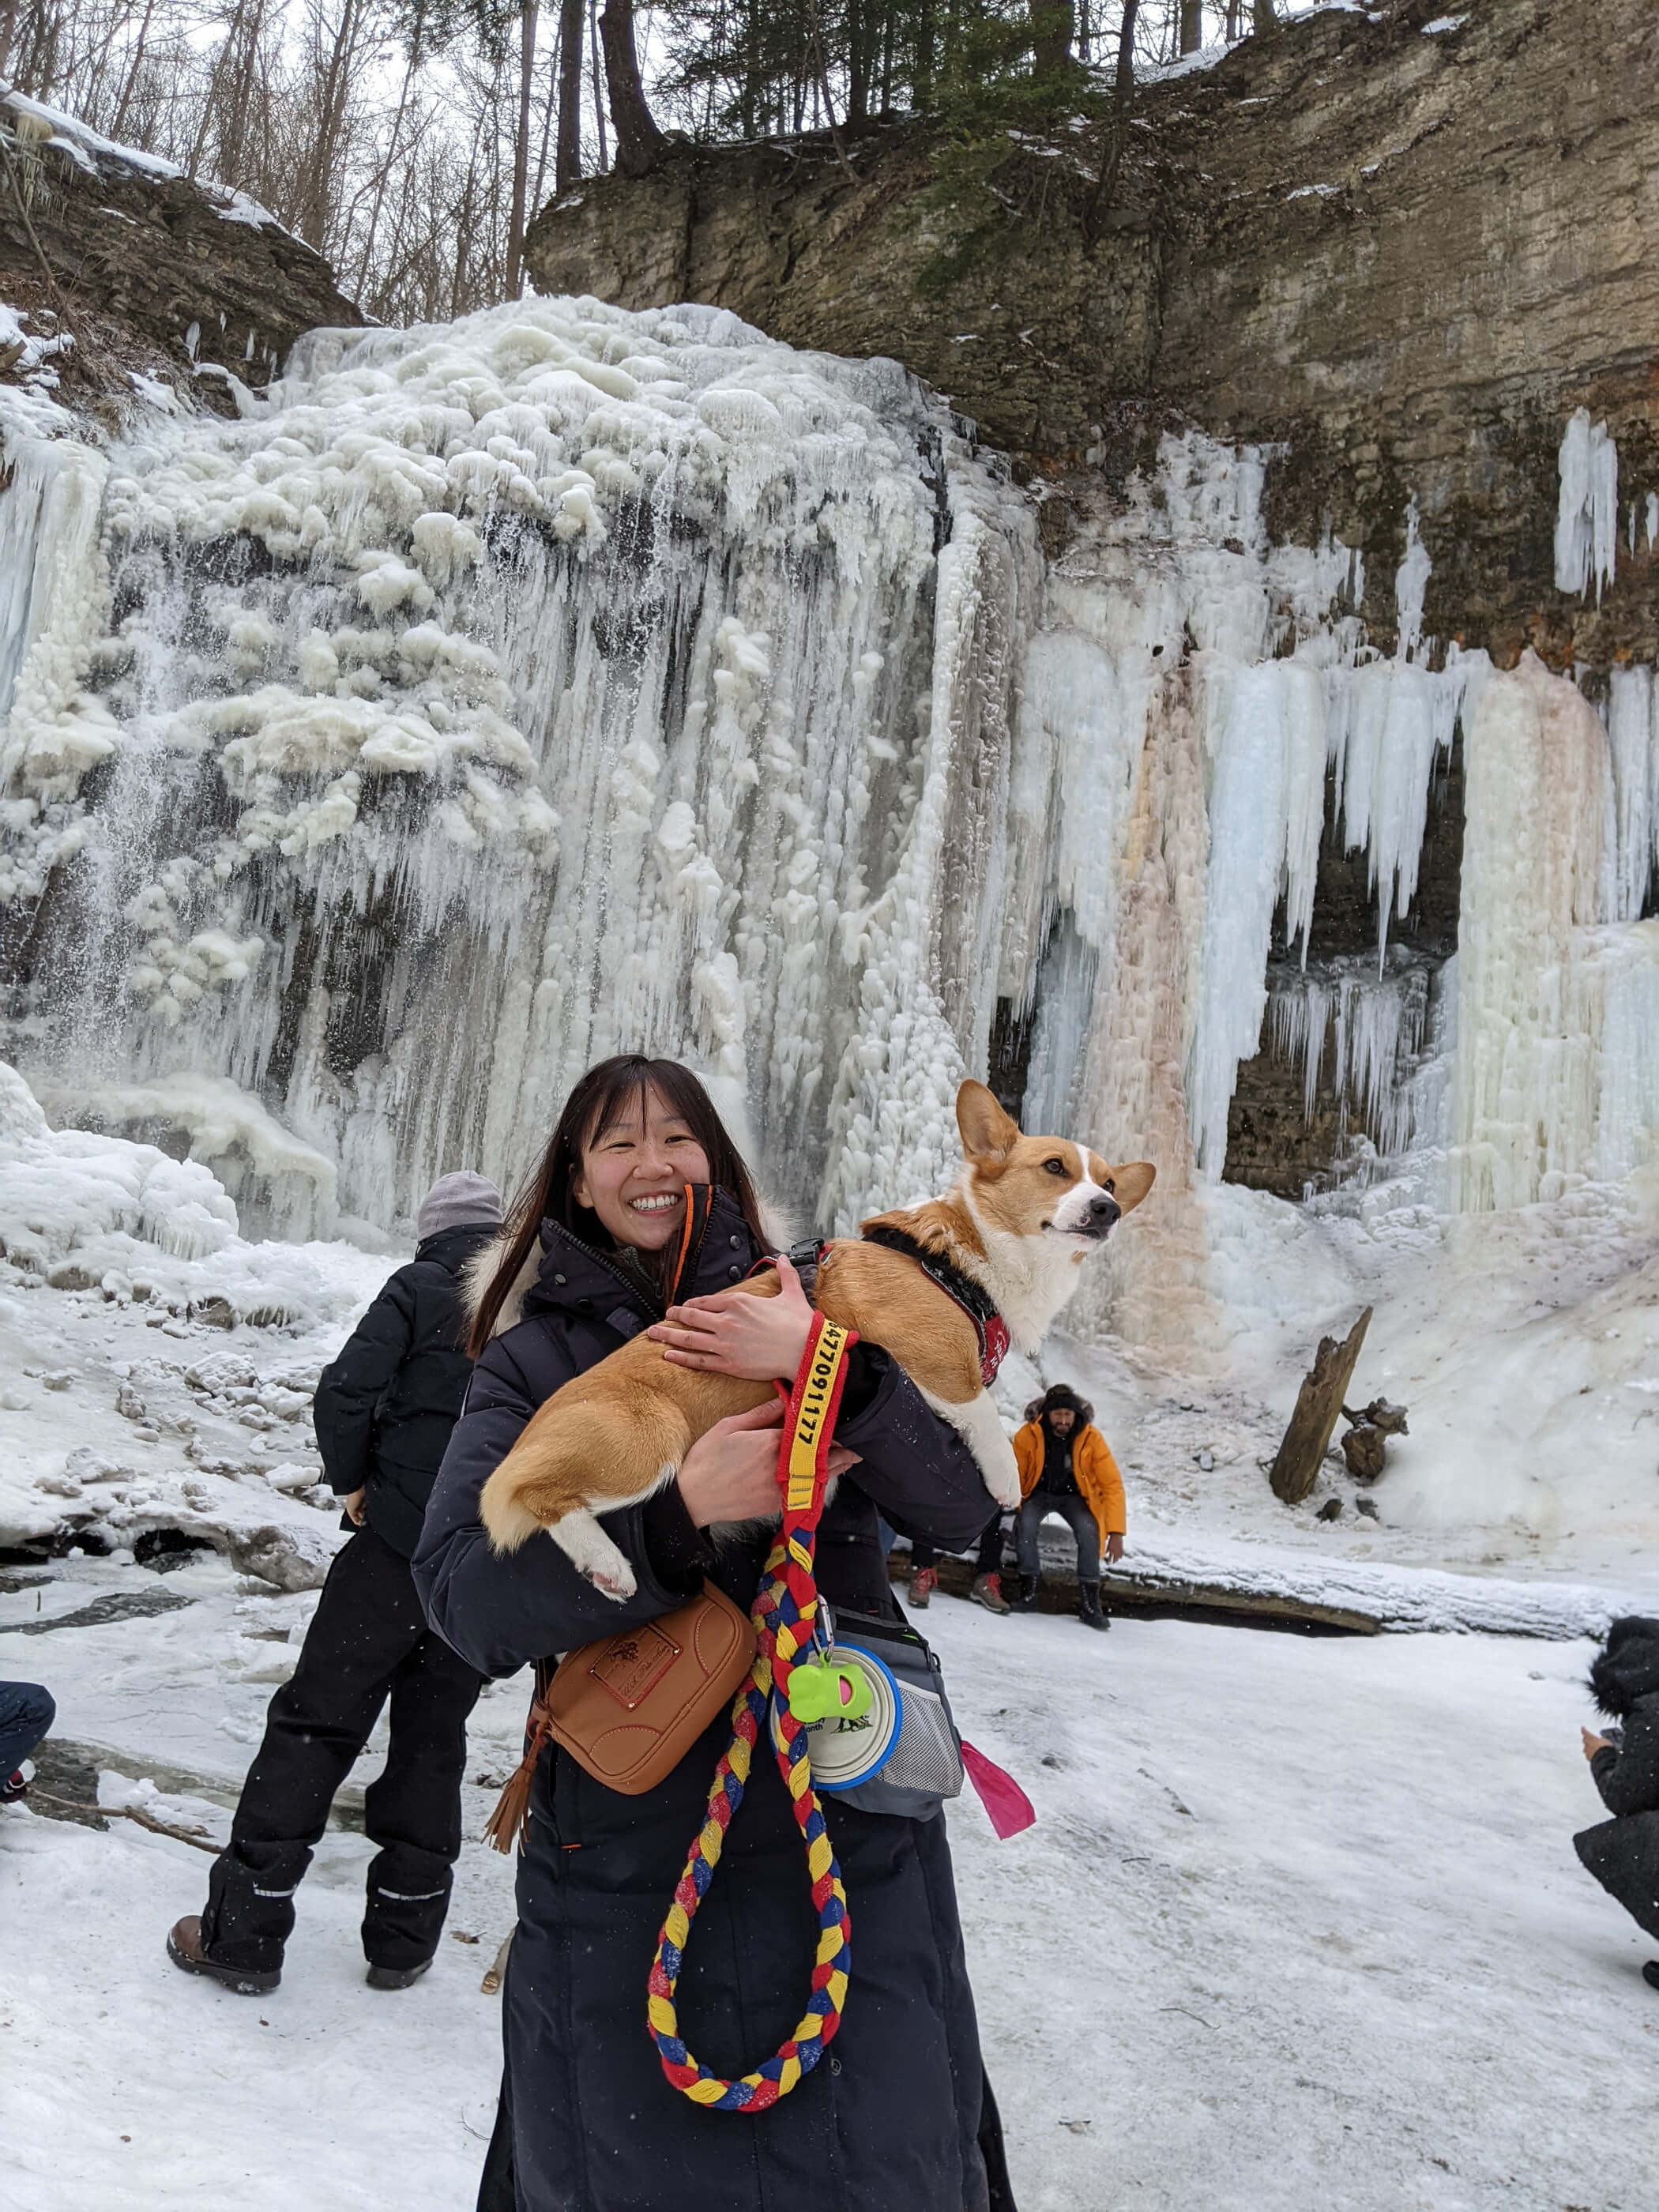 Limone, a red and white corgi wearing a Julius K-9 Harness is in Maria's arm posing by Tiffany Falls, a frozen waterfall in Hamilton. Limone is looking to left